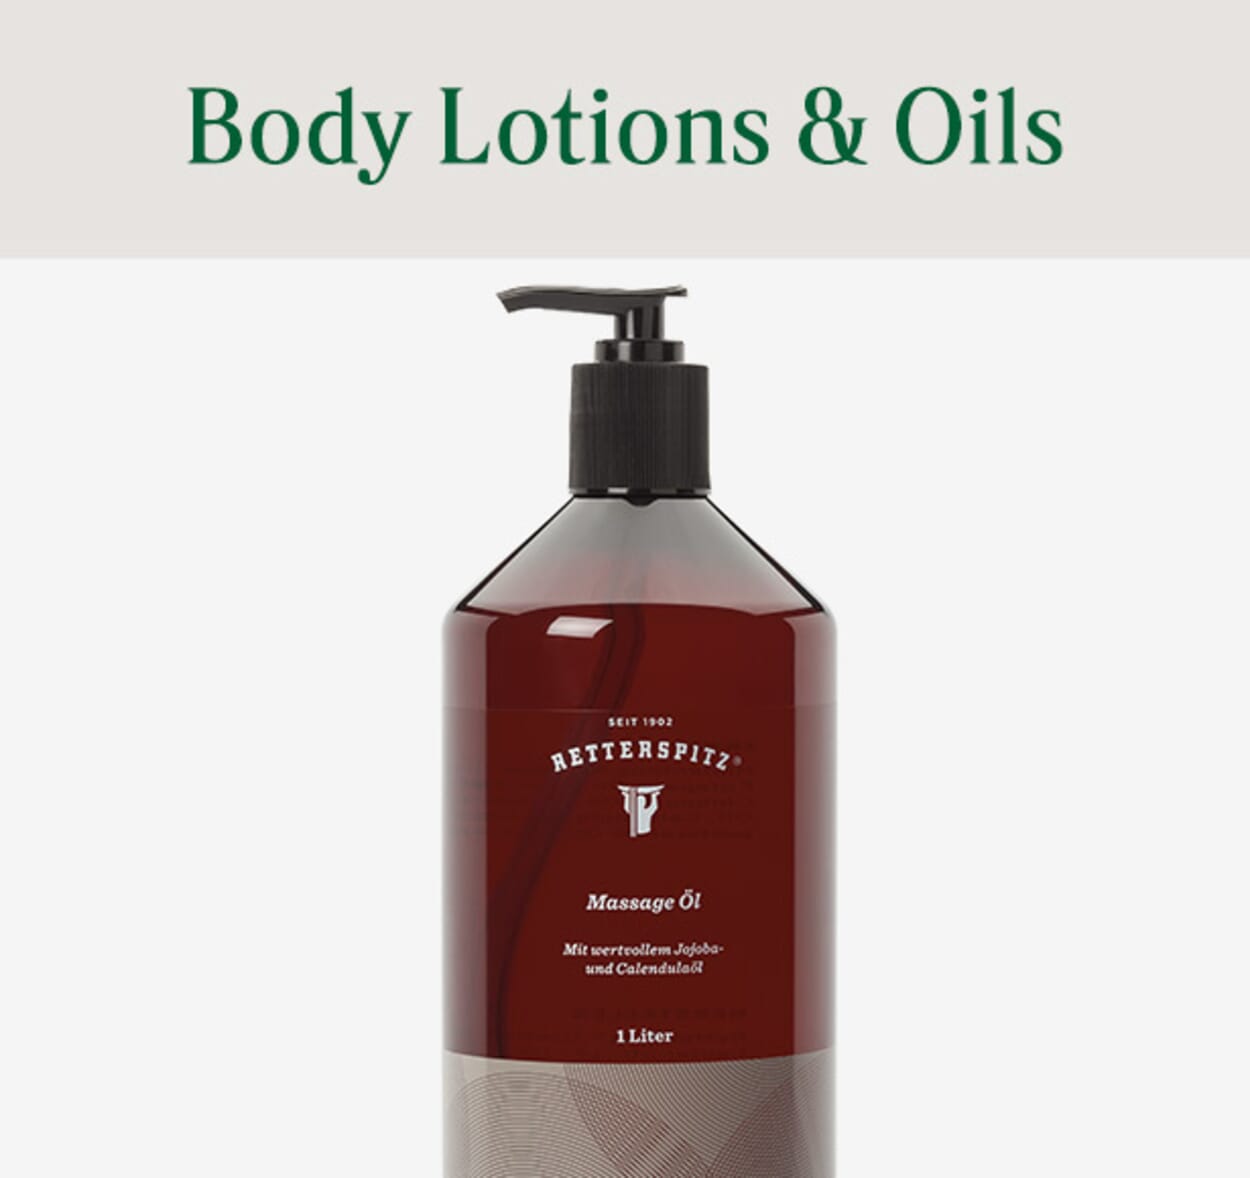 Body Lotions & Oils